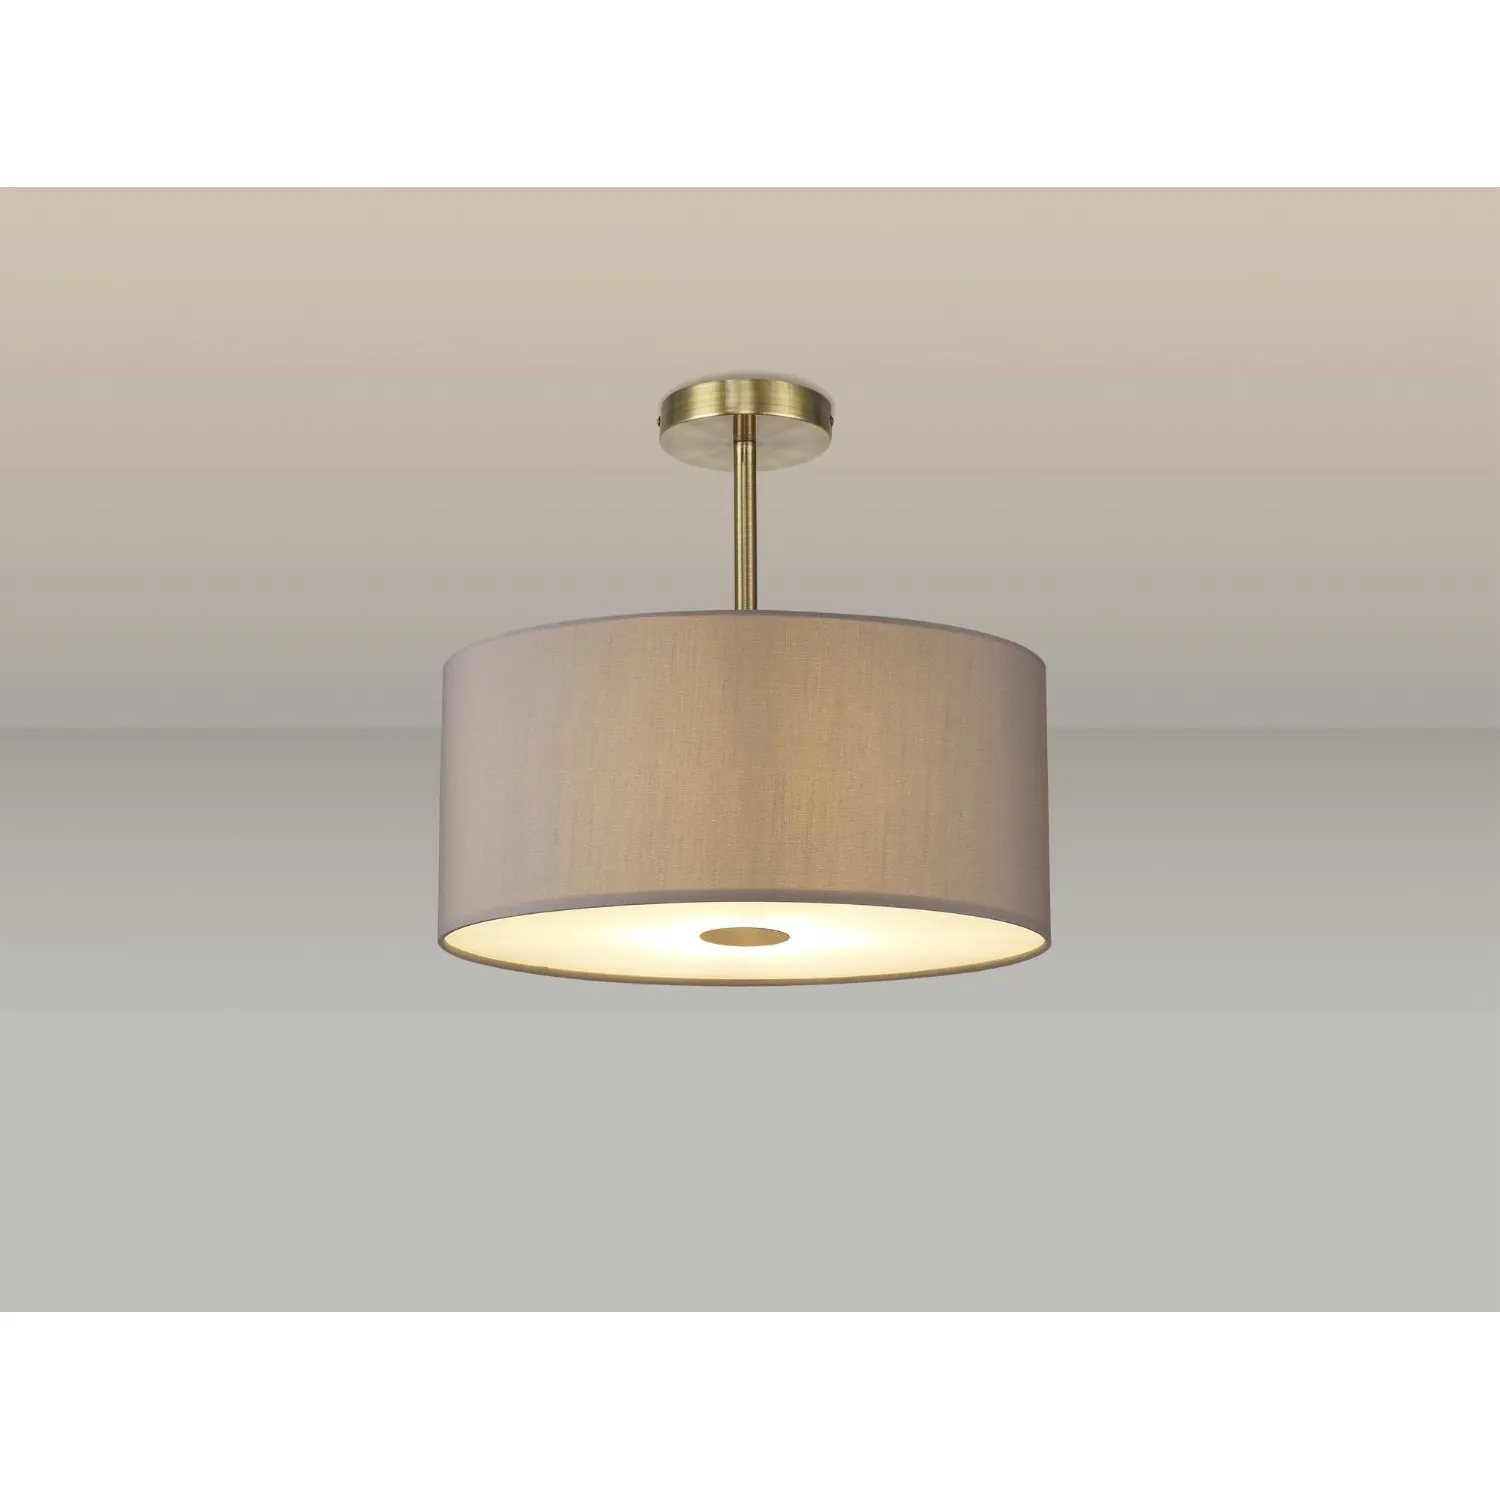 Baymont Antique Brass 5 Light E27 Semi Flush c w 400mm Faux Silk Shade, Grey White Laminate And 400mm Frosted AB Acrylic Diffuser